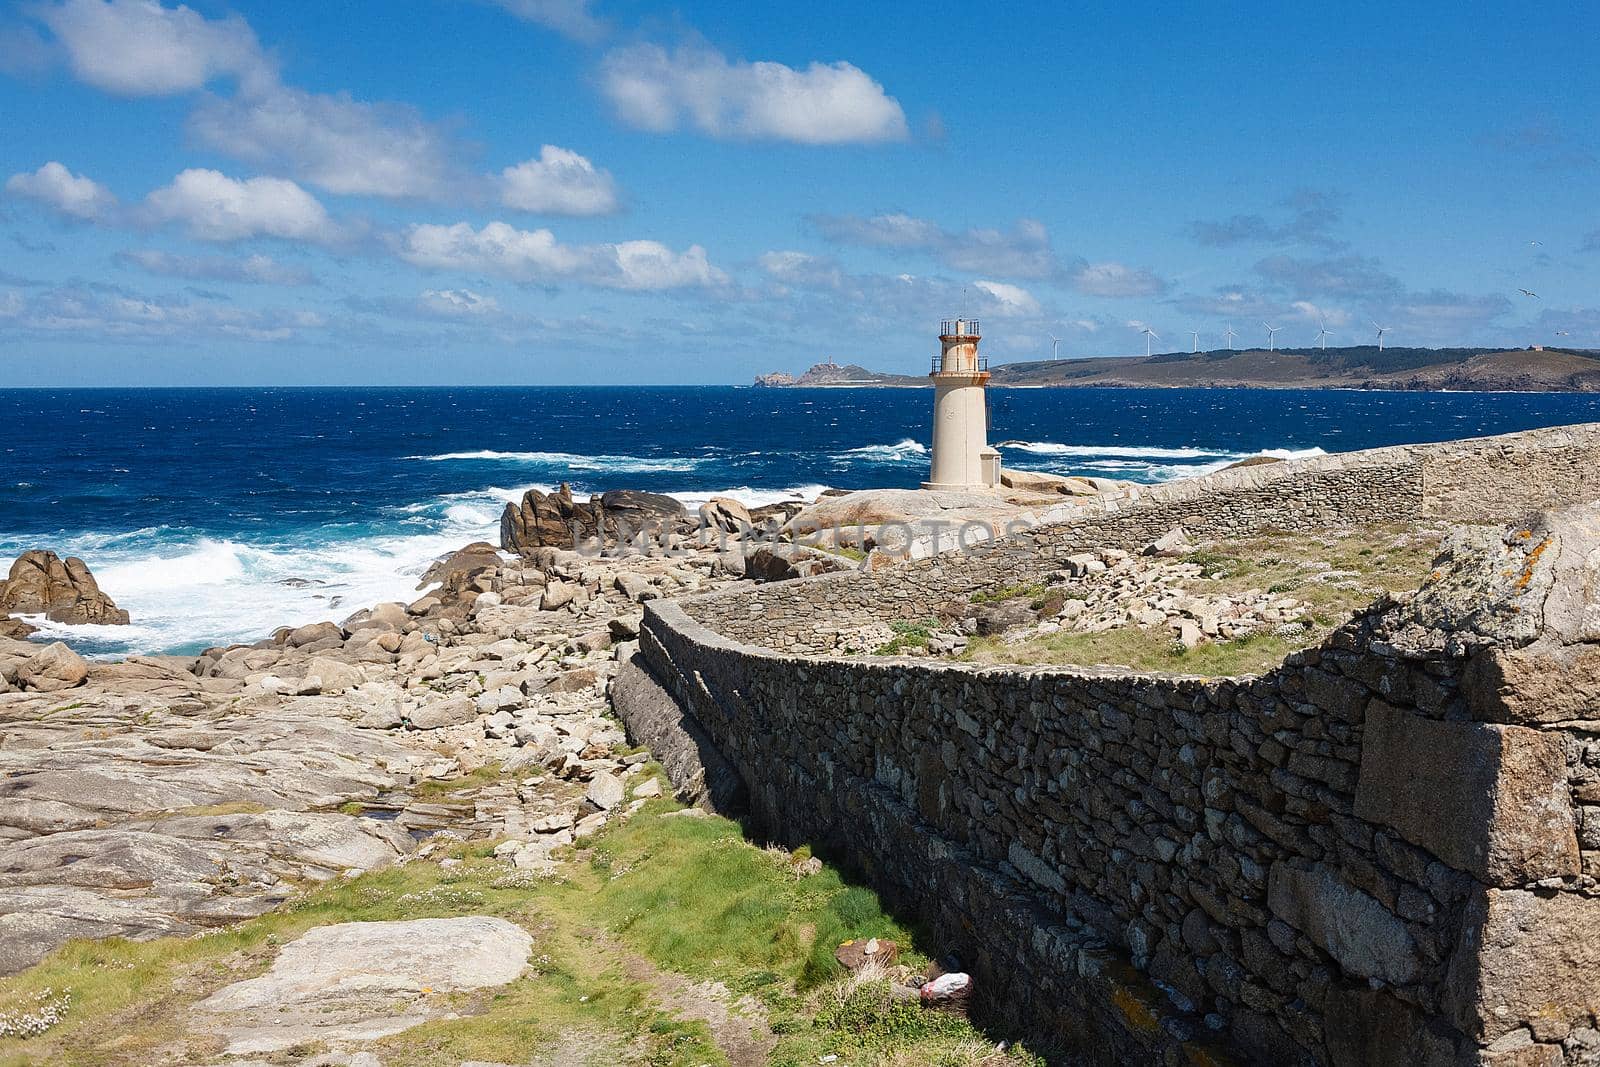 View on a lighthouse and ancient wall made of stones near the ocean with blue skies and white clouds. The scene from Camino de Santiago, tourist path in Spain.